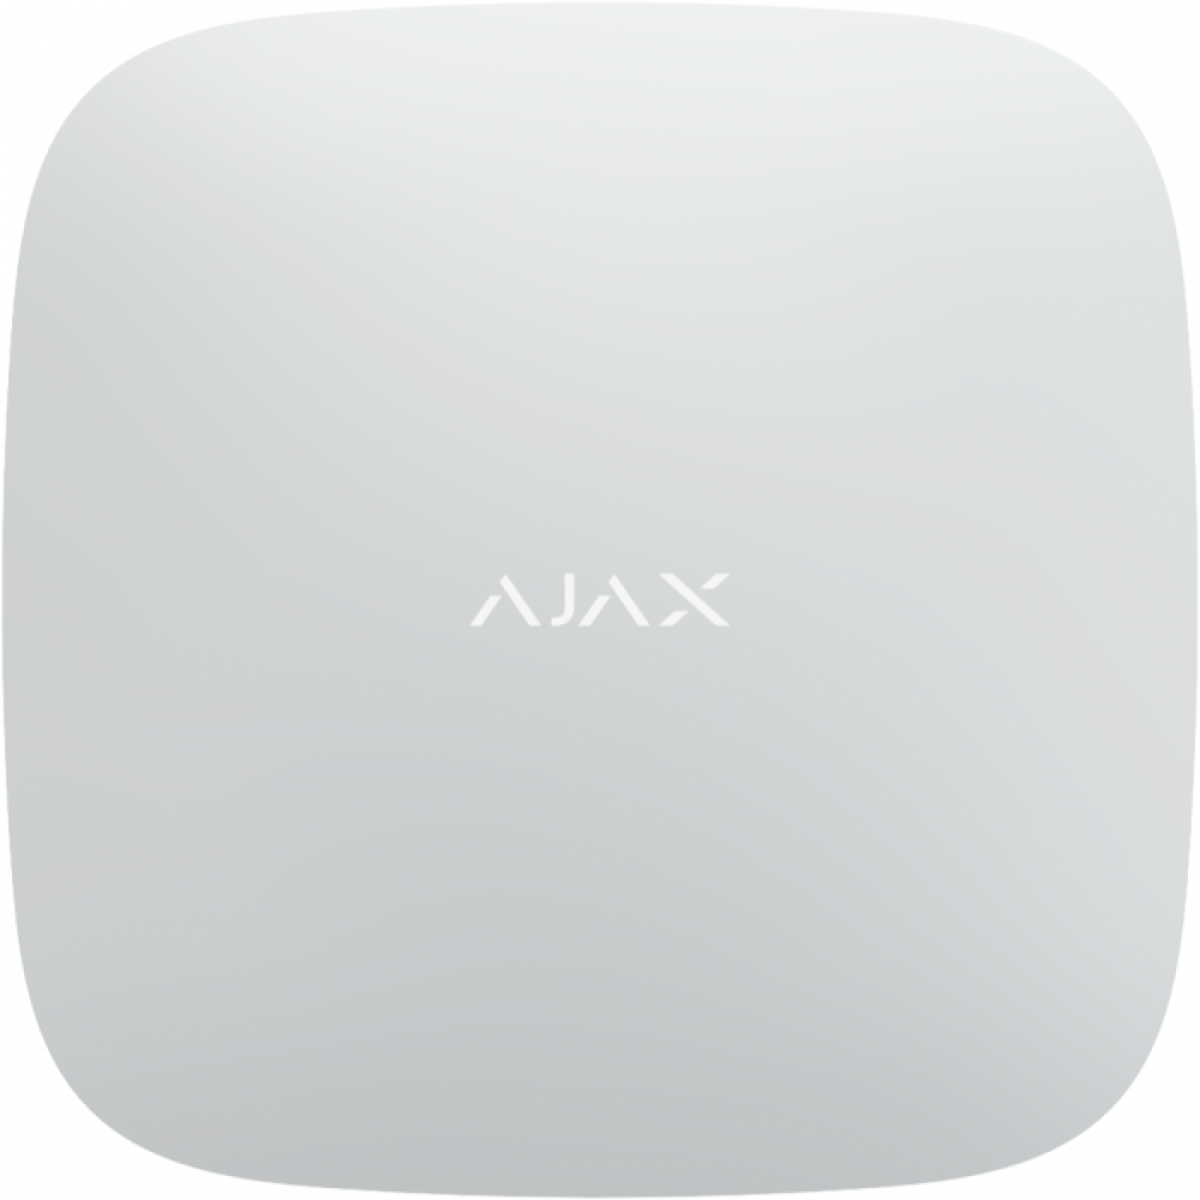 Ajax HUB2 Security system control panel with support for photo verification White